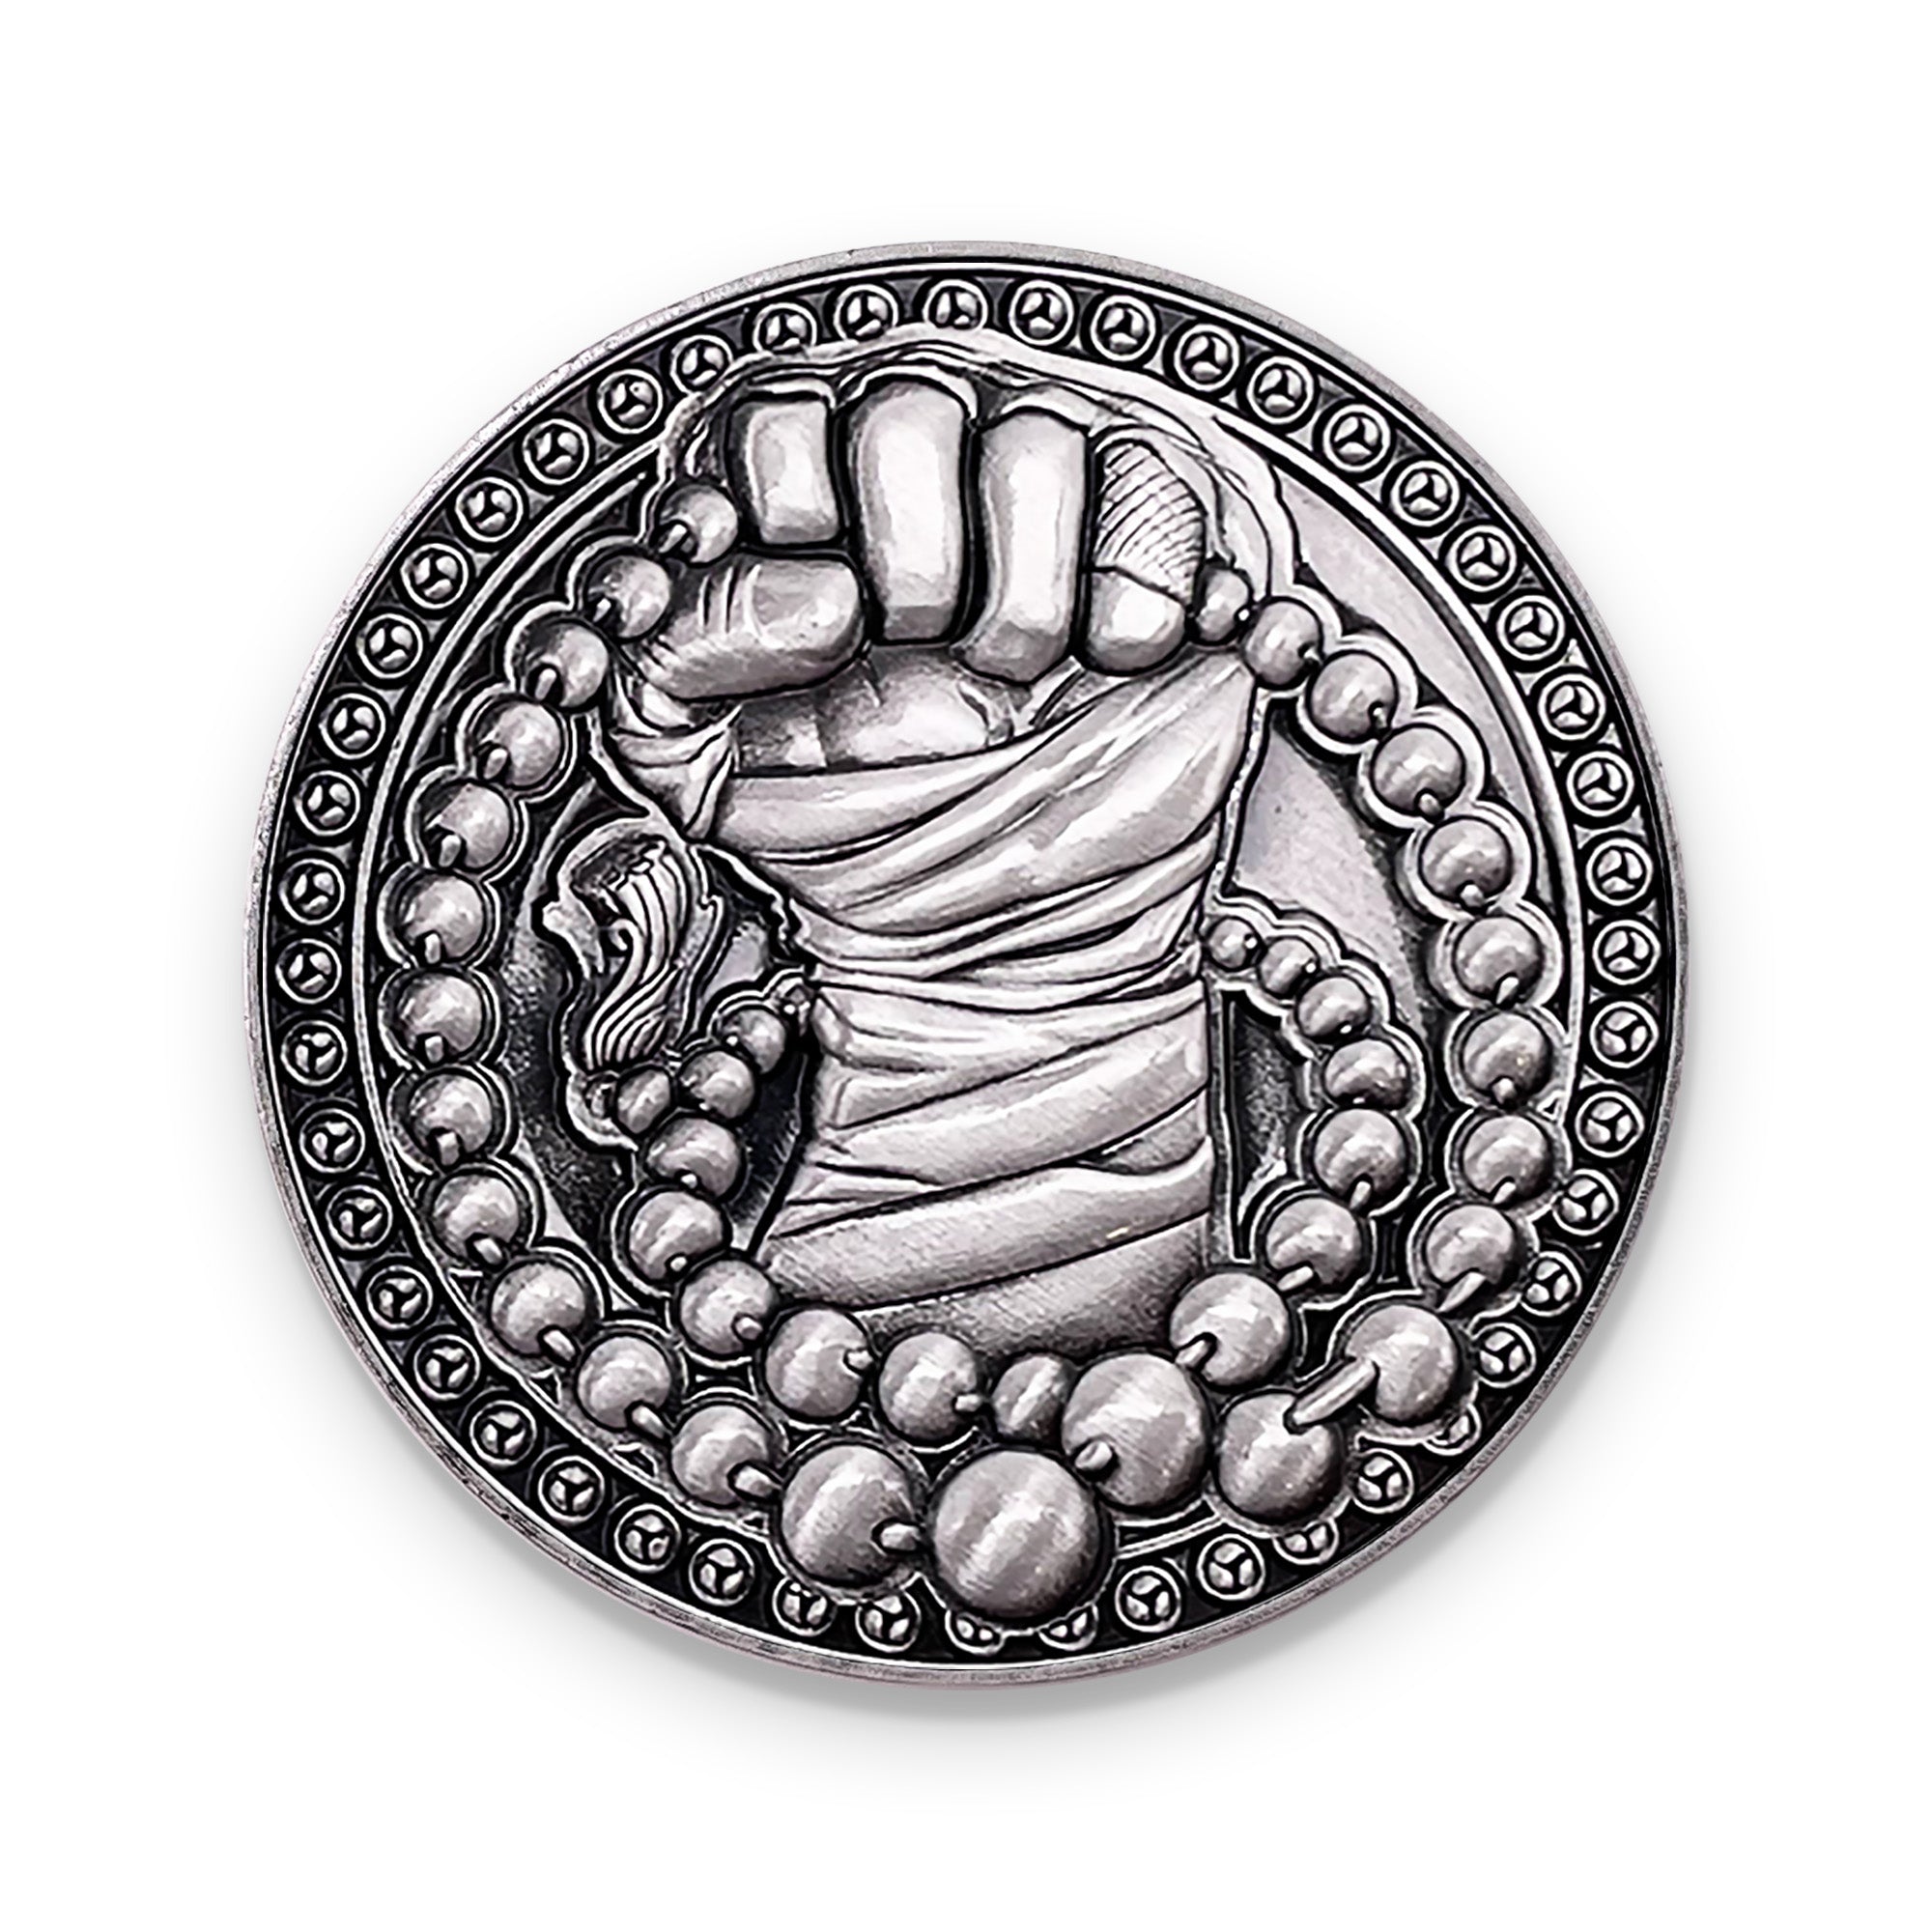 Monk - Single 45mm Profession Coin - NOR 03428